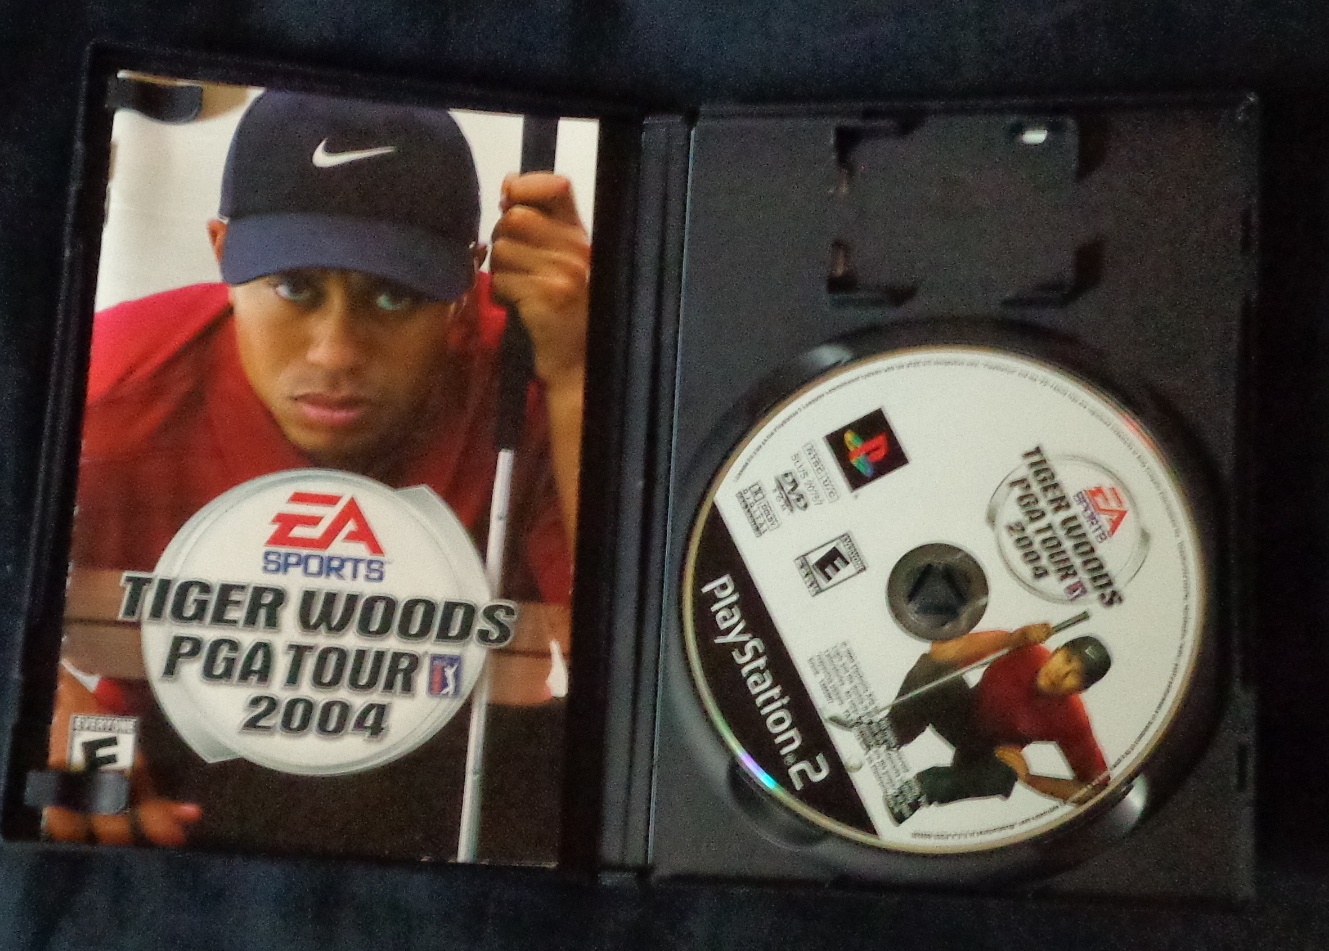 Tiger Woods PGA Tour 2004 for PS2 with case and manual - $6.99